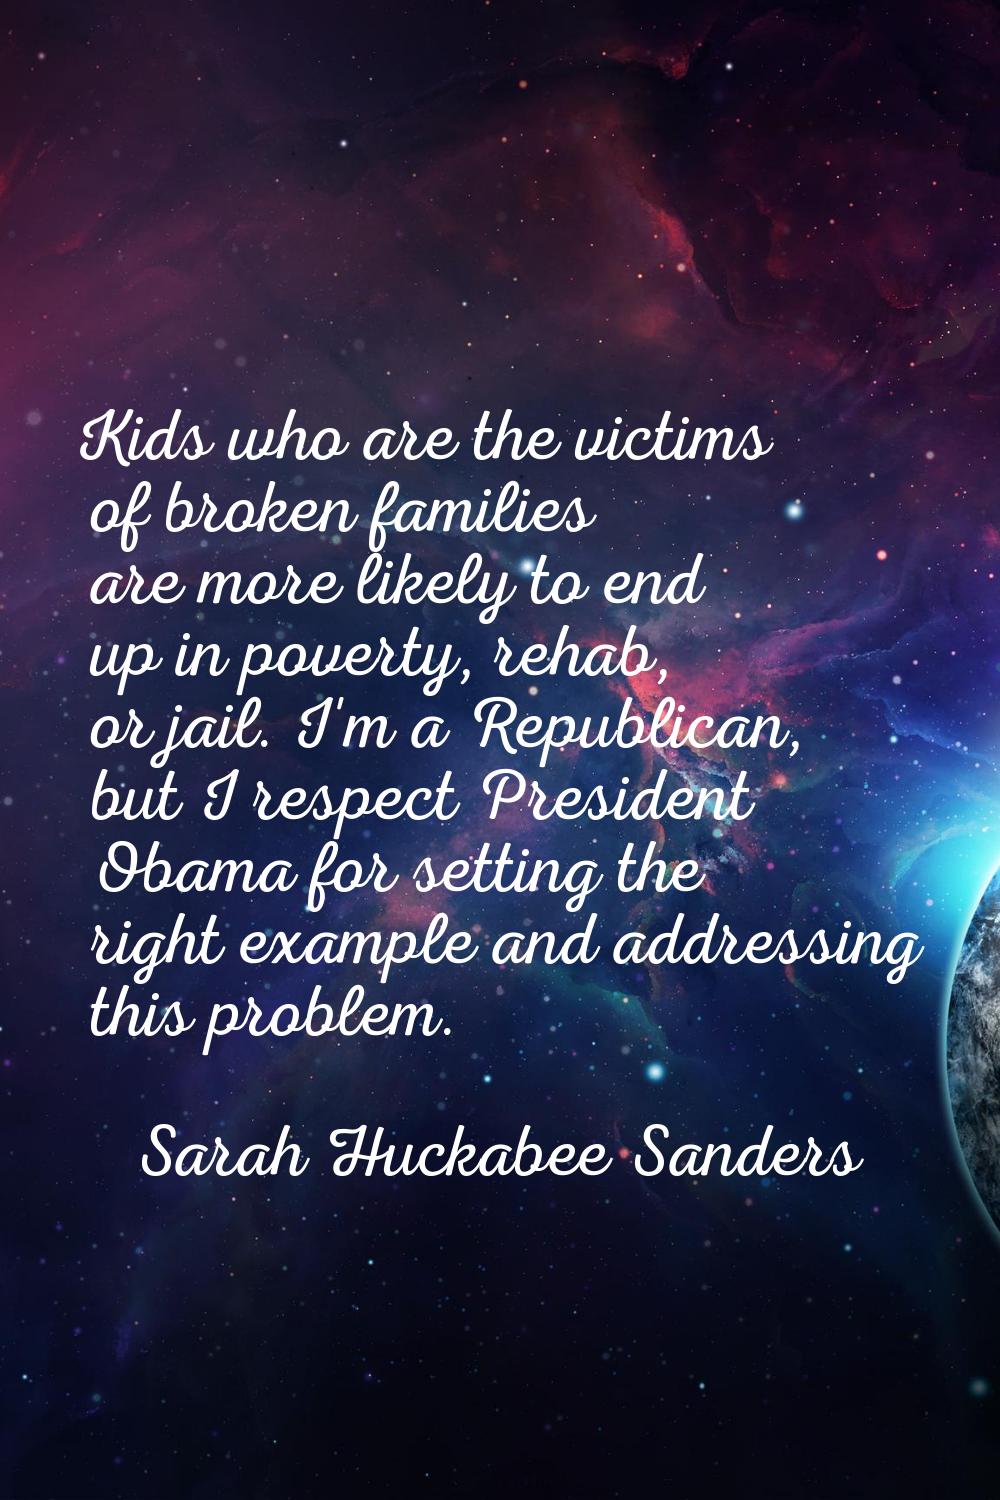 Kids who are the victims of broken families are more likely to end up in poverty, rehab, or jail. I